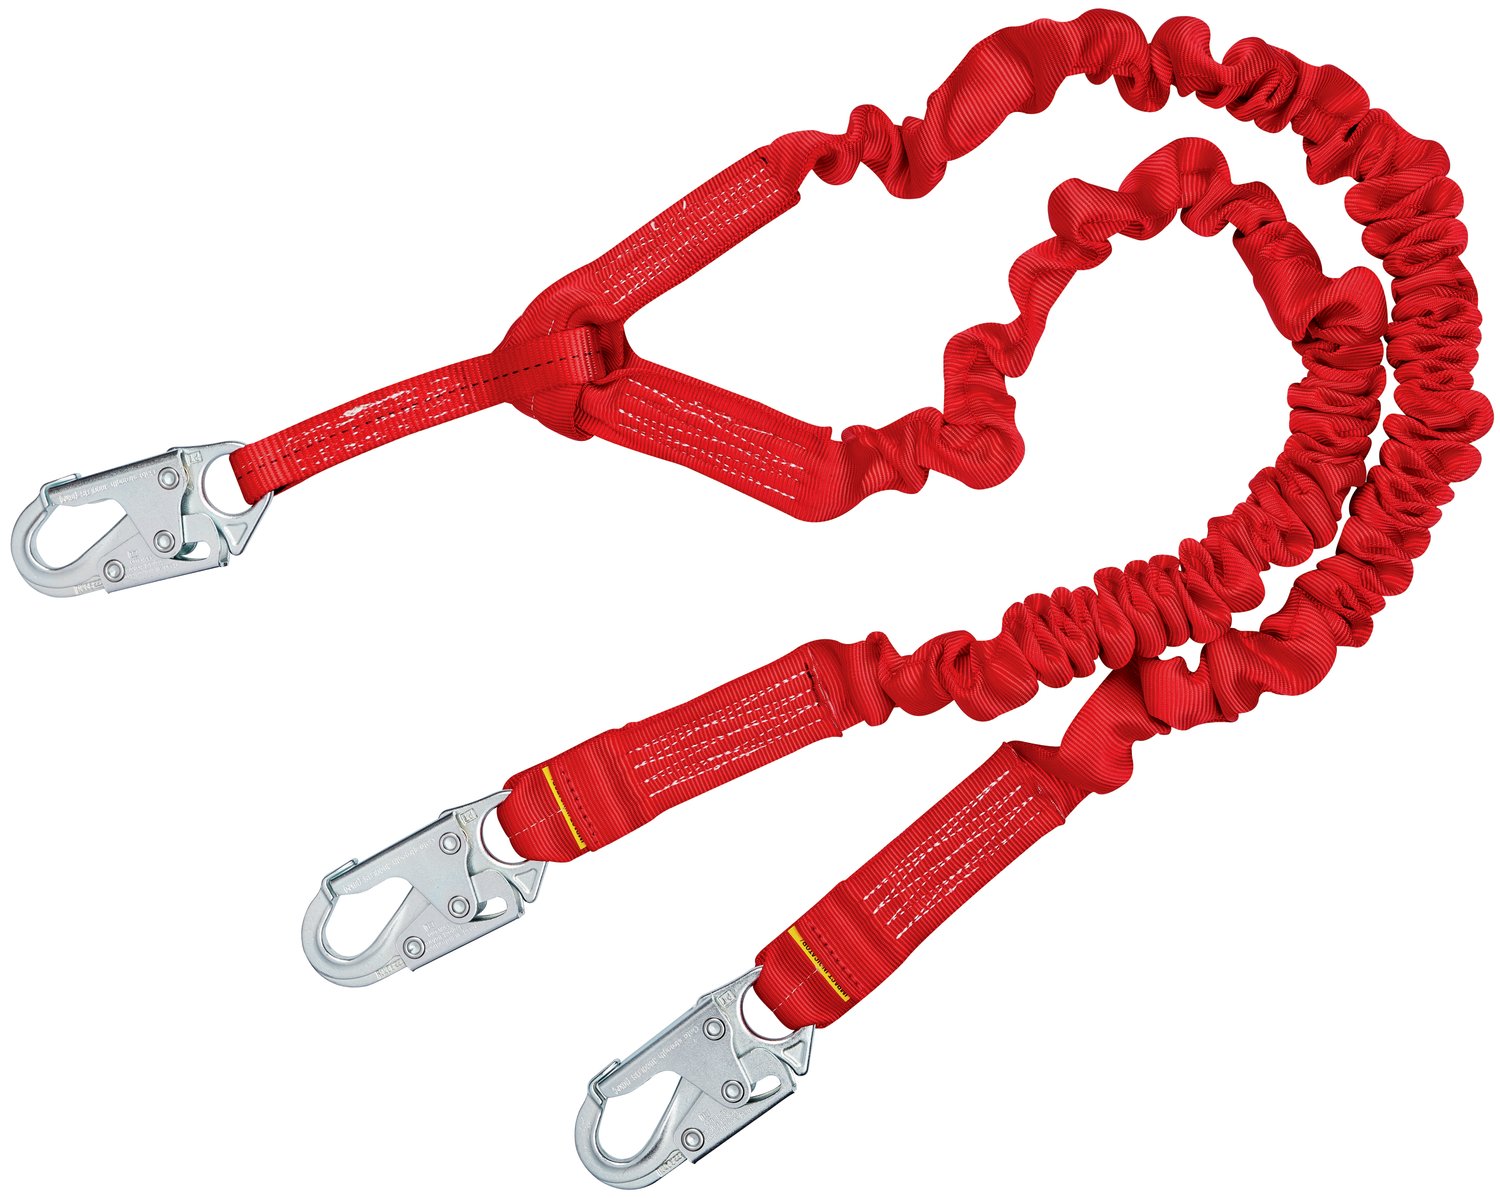 7012817350 - 3M Protecta 100% Tie-Off Stretch Web Shock-Absorbing Lanyard 1340141, 6 ft